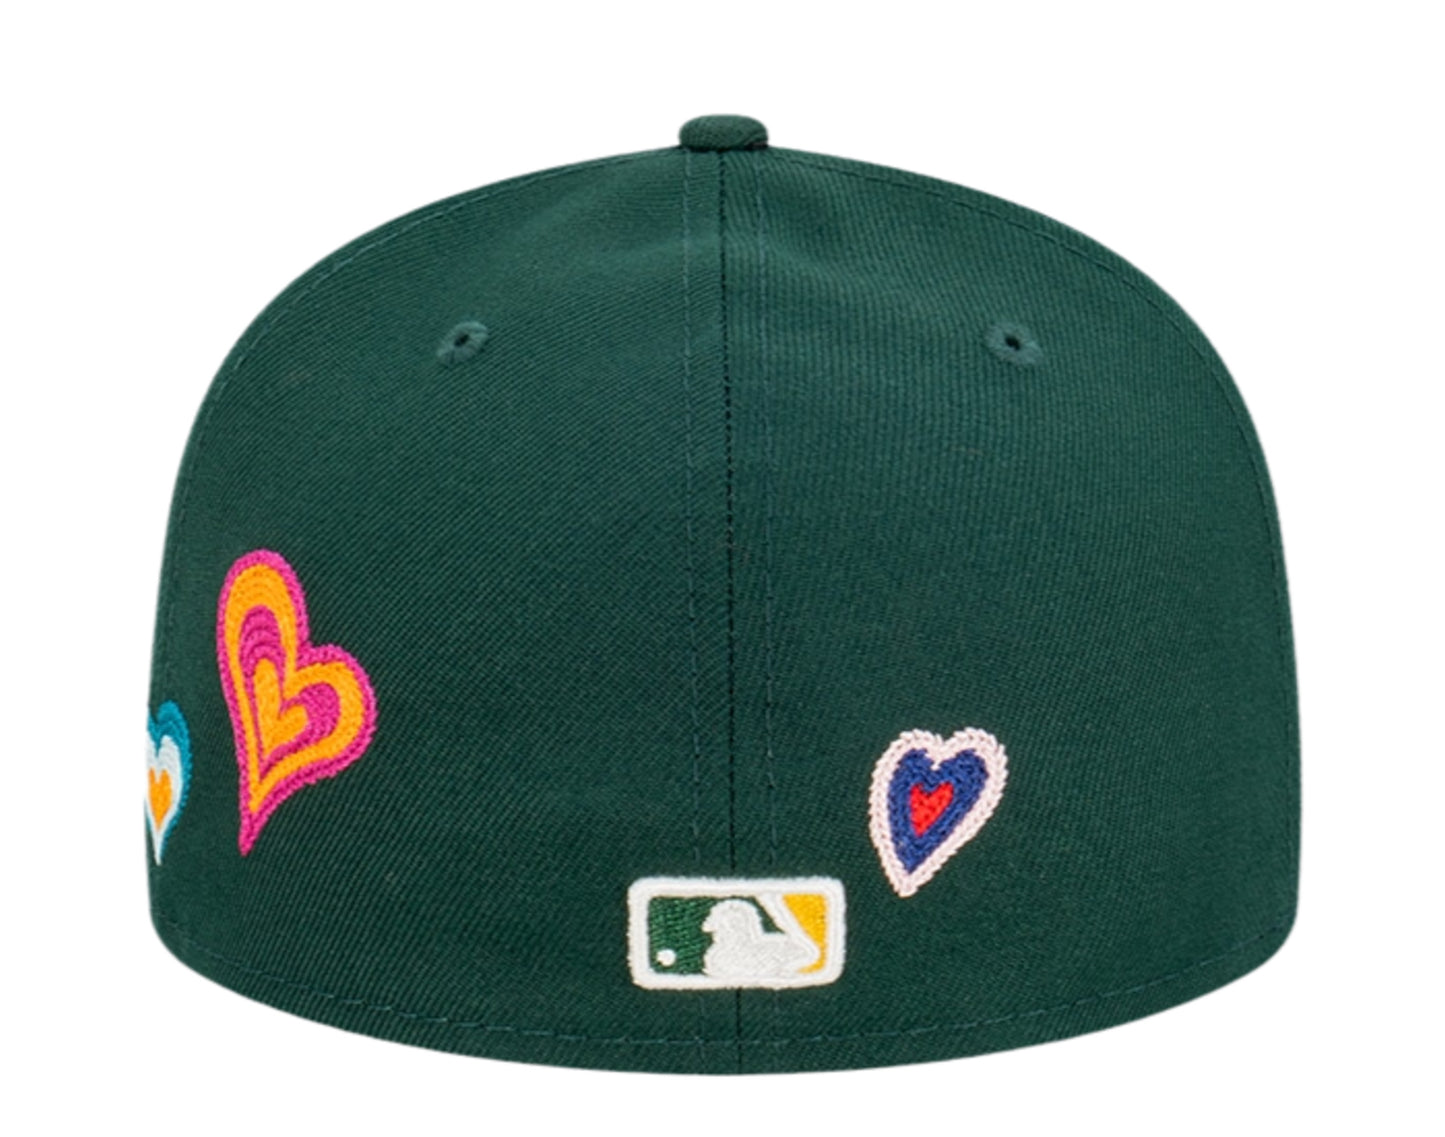 New Era 59Fifty MLB Oakland Athletics Chain Stitch Heart Fitted Hat W/ Pink Undervisor